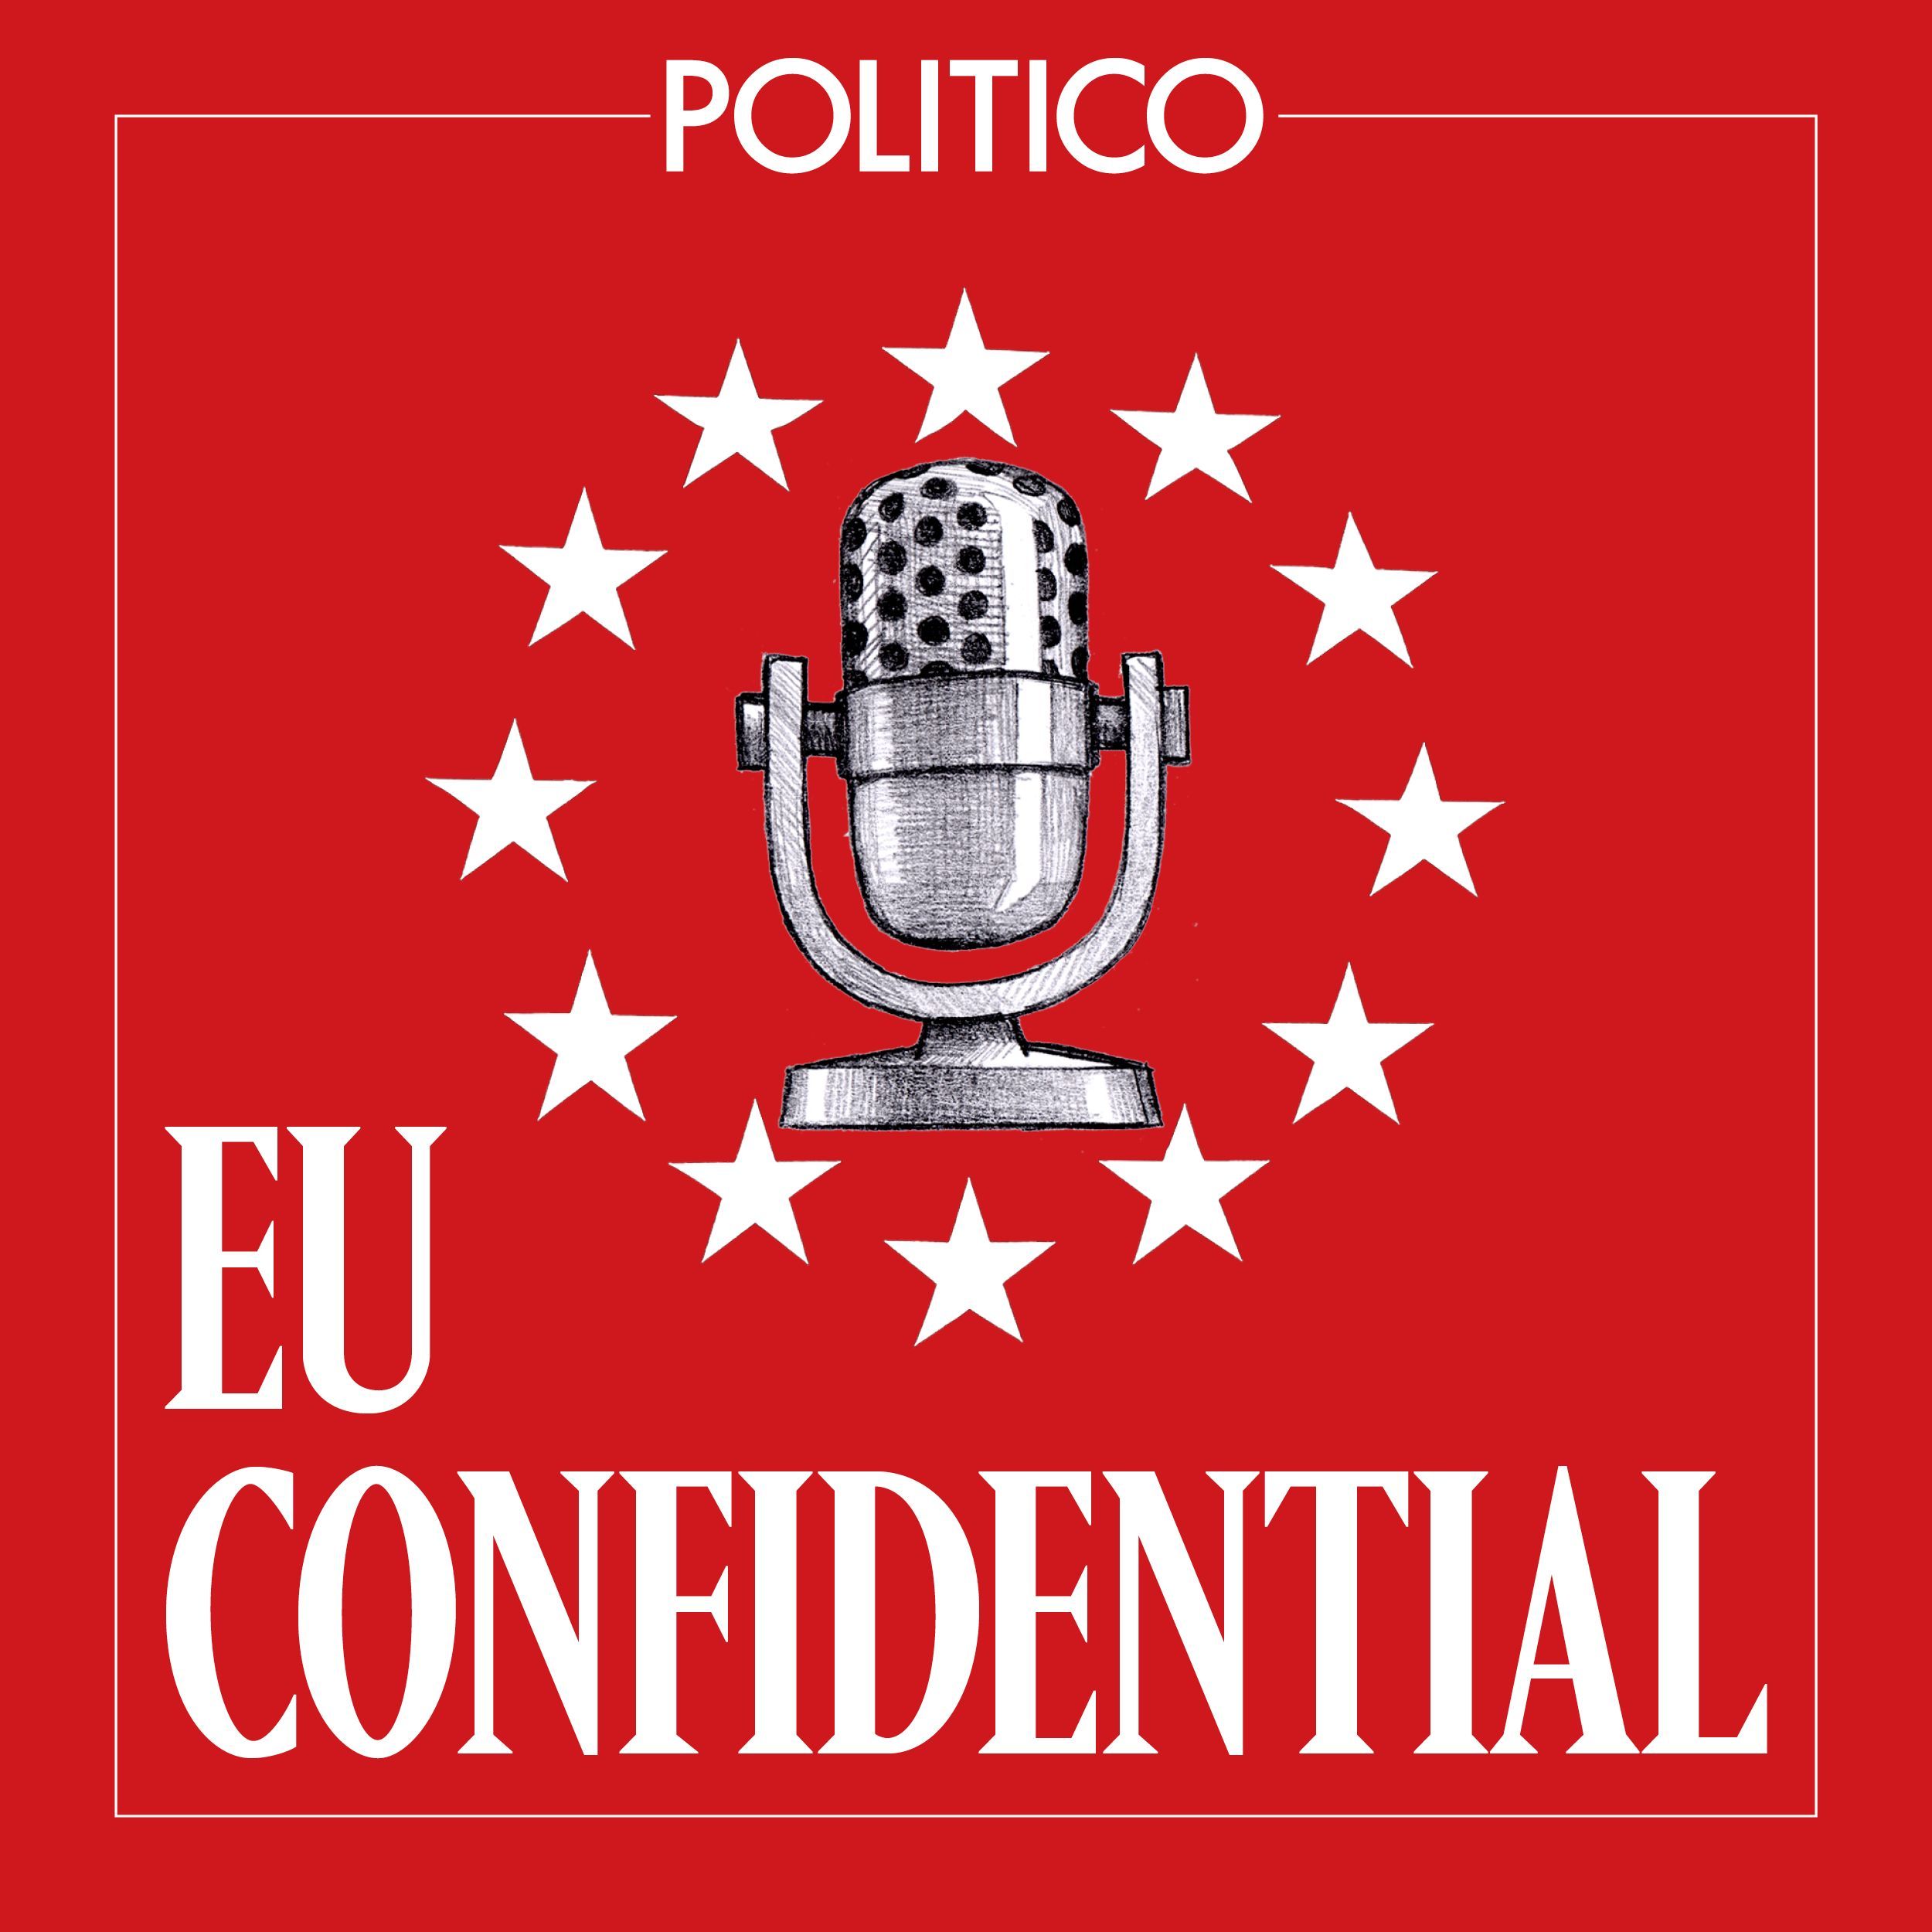 Ep 122, presented by BP: Brexit deal — European Council behind the scenes — Greek PM Mitsotakis